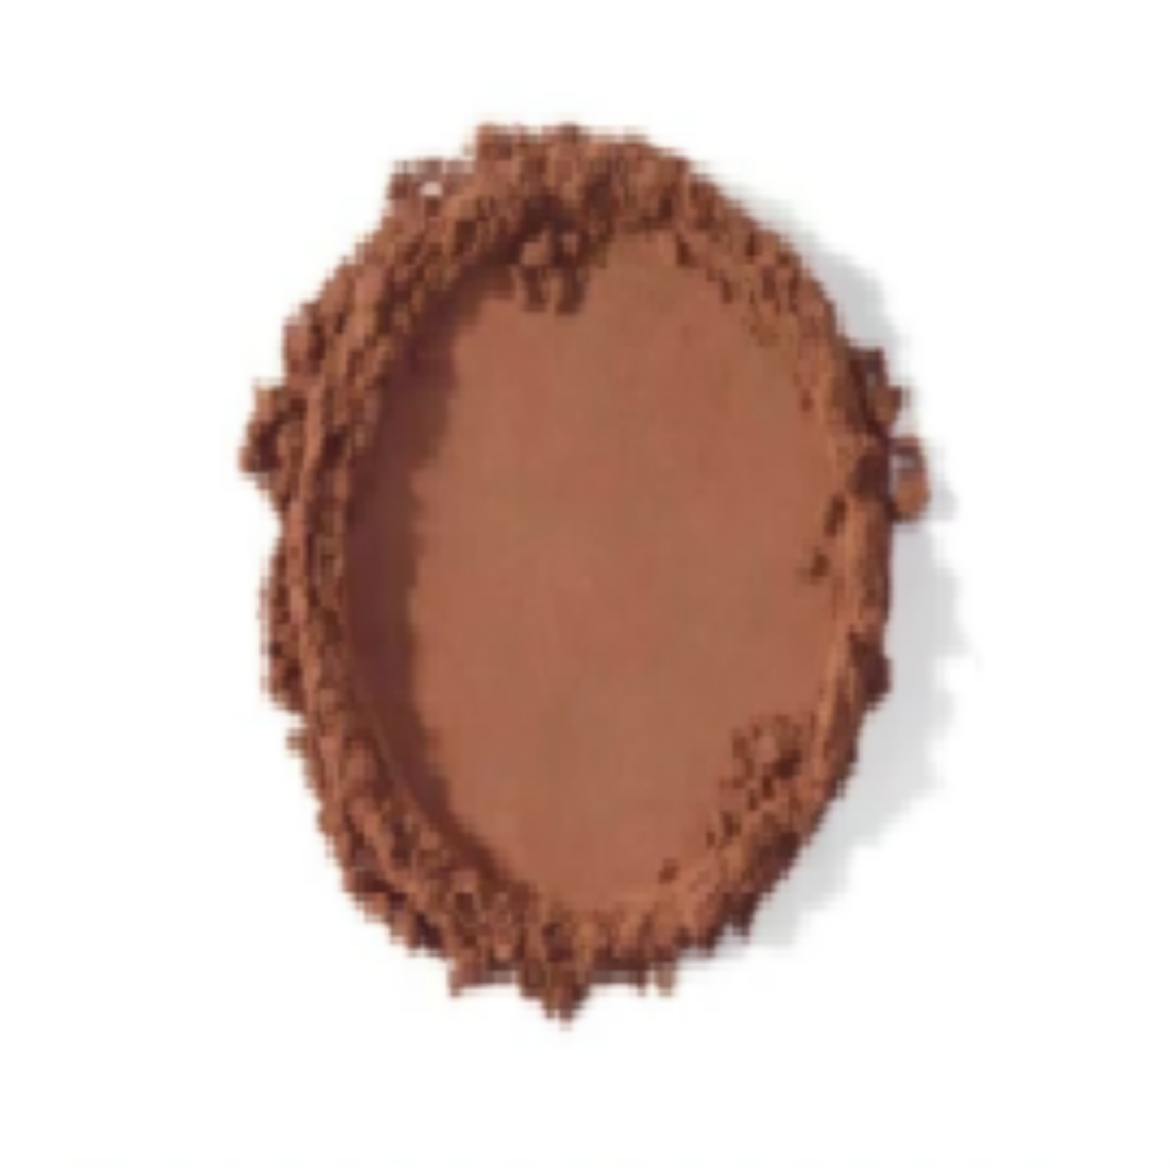 Picture of 5KG 350-DP11 LIGHT COCOA POWDER (10-12% FAT)